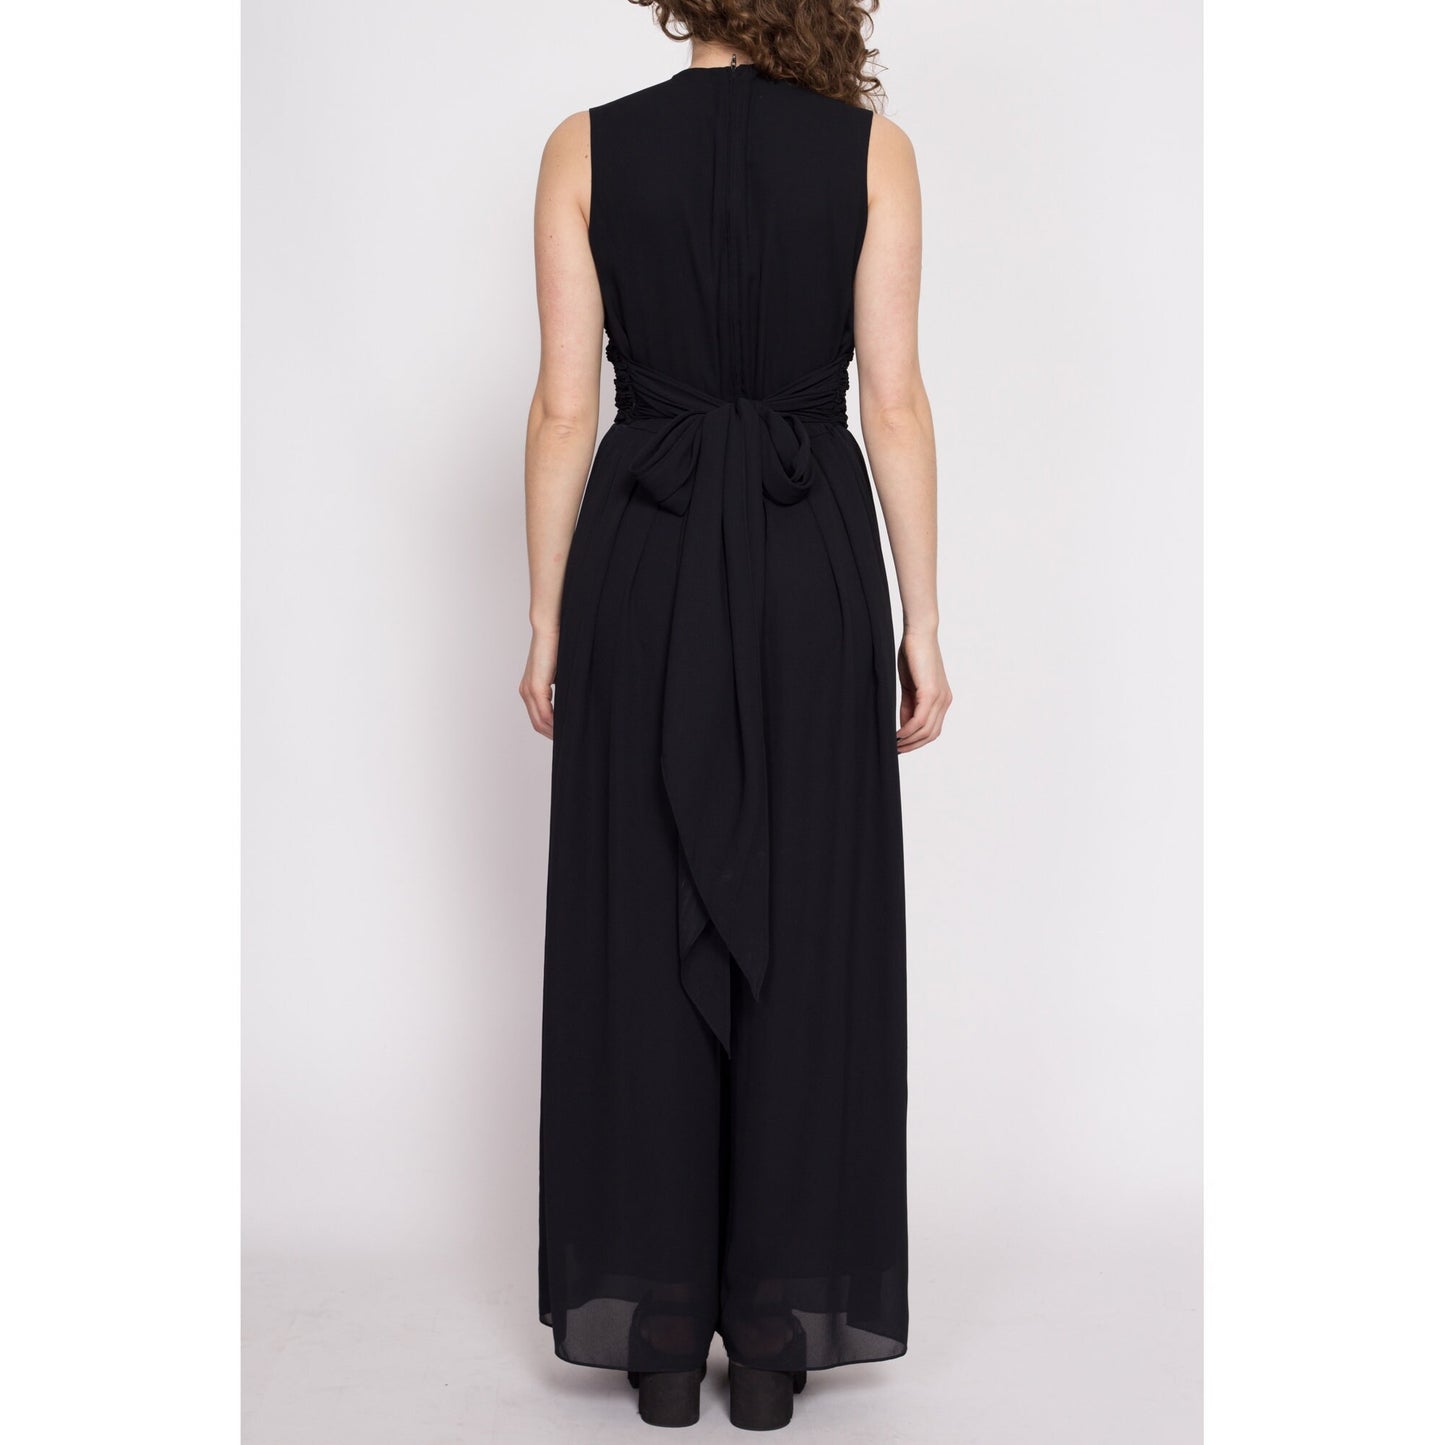 80s Black Ruched Palazzo Jumpsuit - Medium | Vintage Sleeveless Fitted Waist Wide Leg Pantsuit